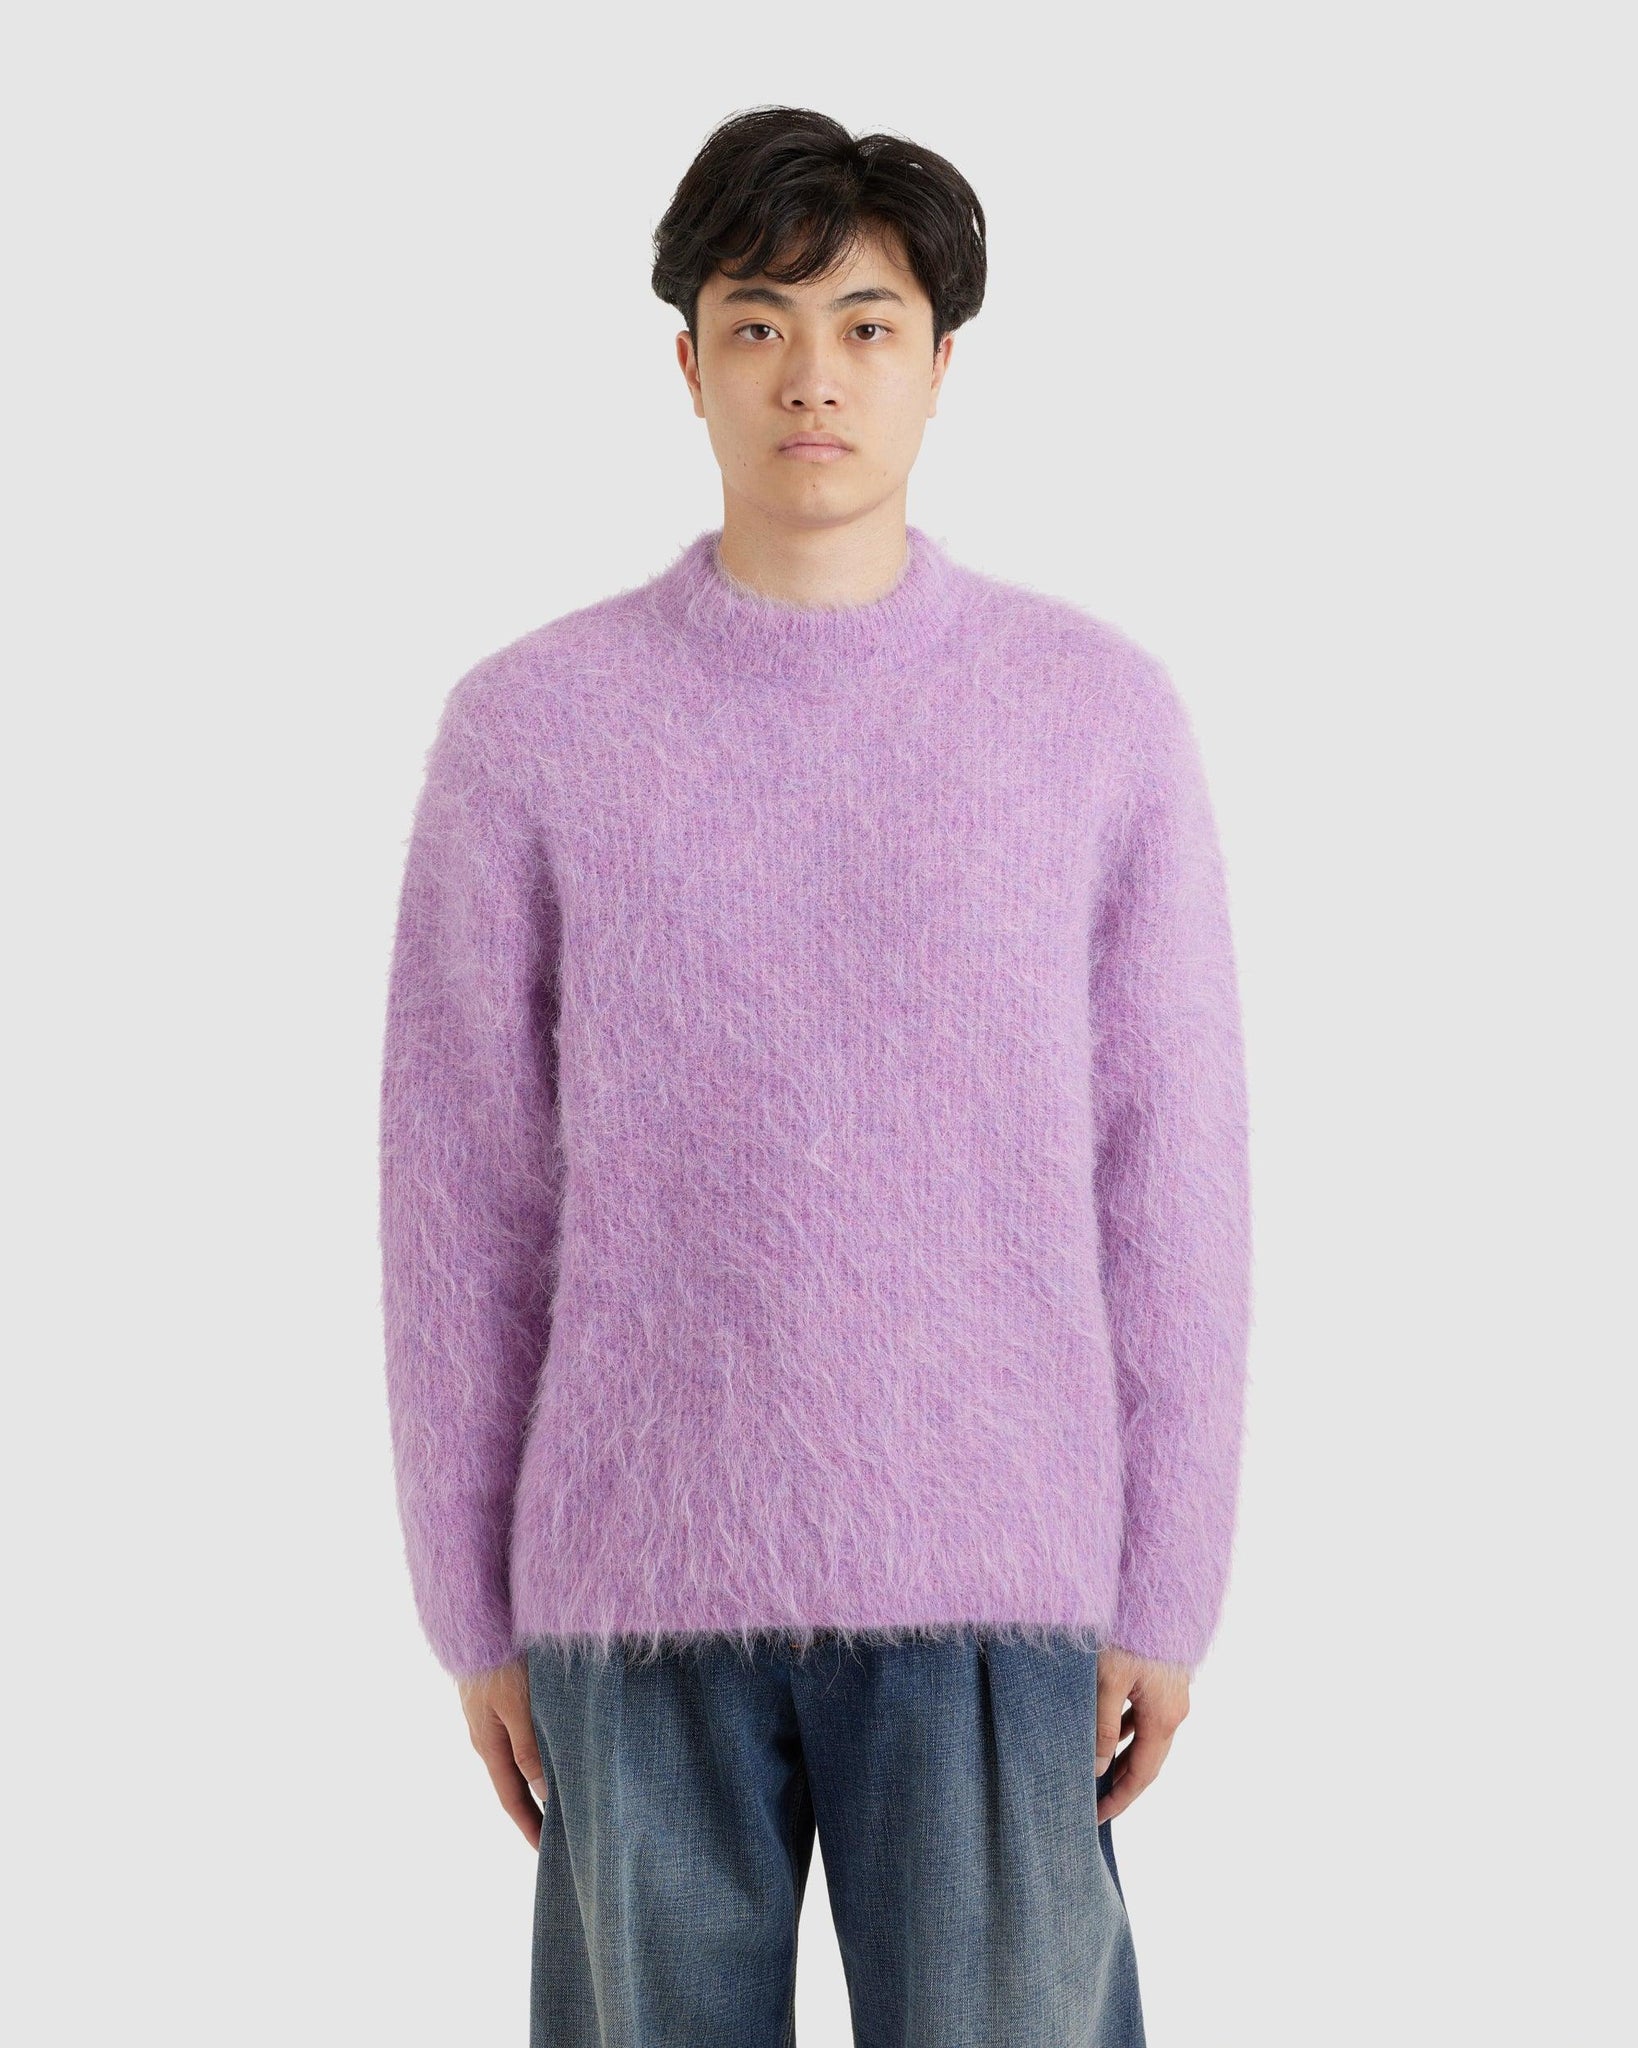 Haru Sweater Malbec - {{ collection.title }} - Chinatown Country Club 